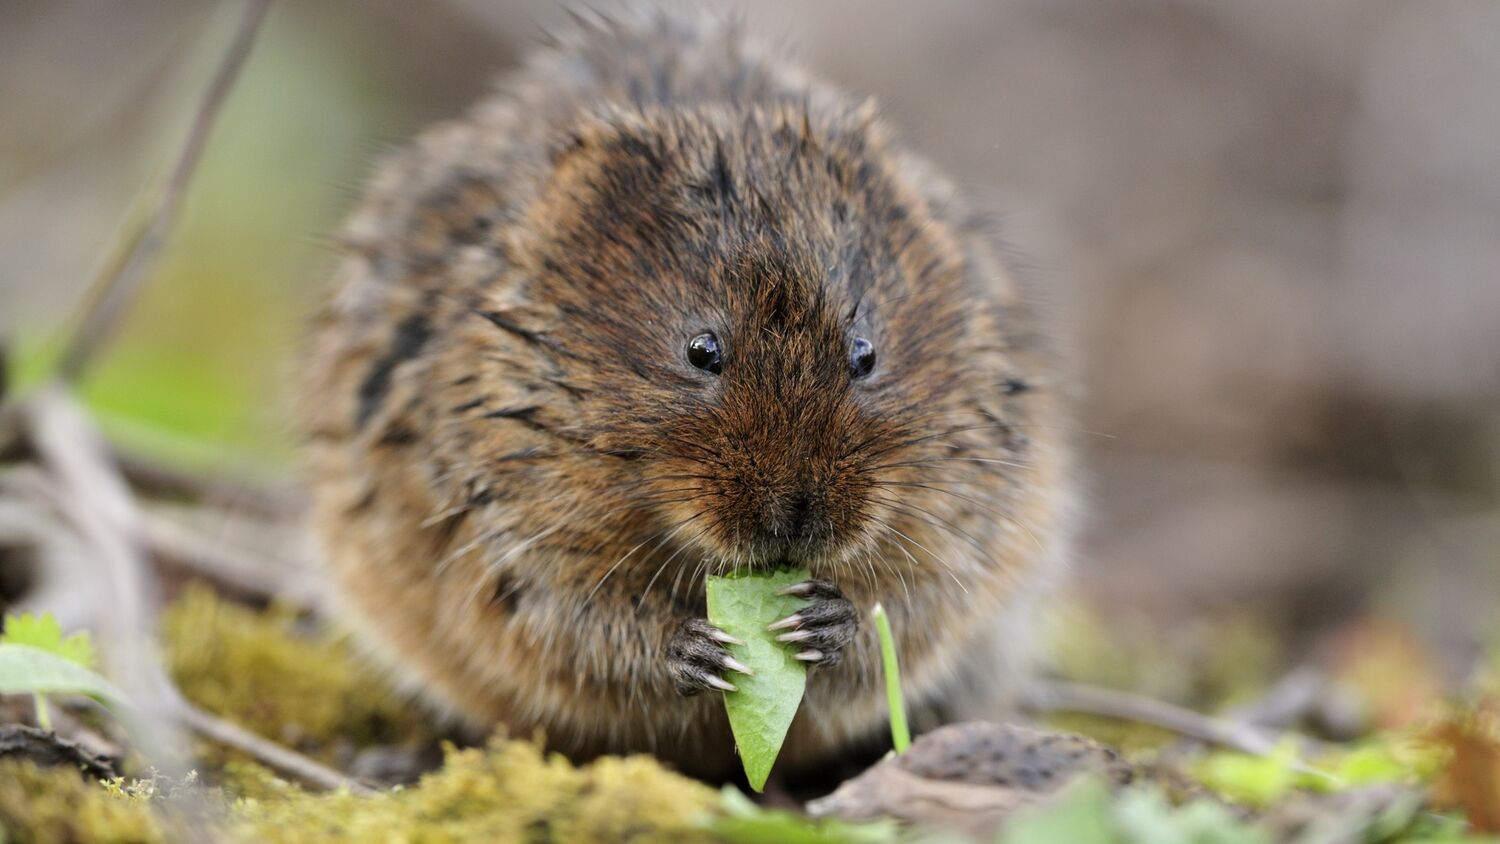 A very round and furry, dark brown water vole sits on its back legs and nibbles at a blade of grass. It holds the blade in its front paws, which have very long claws.